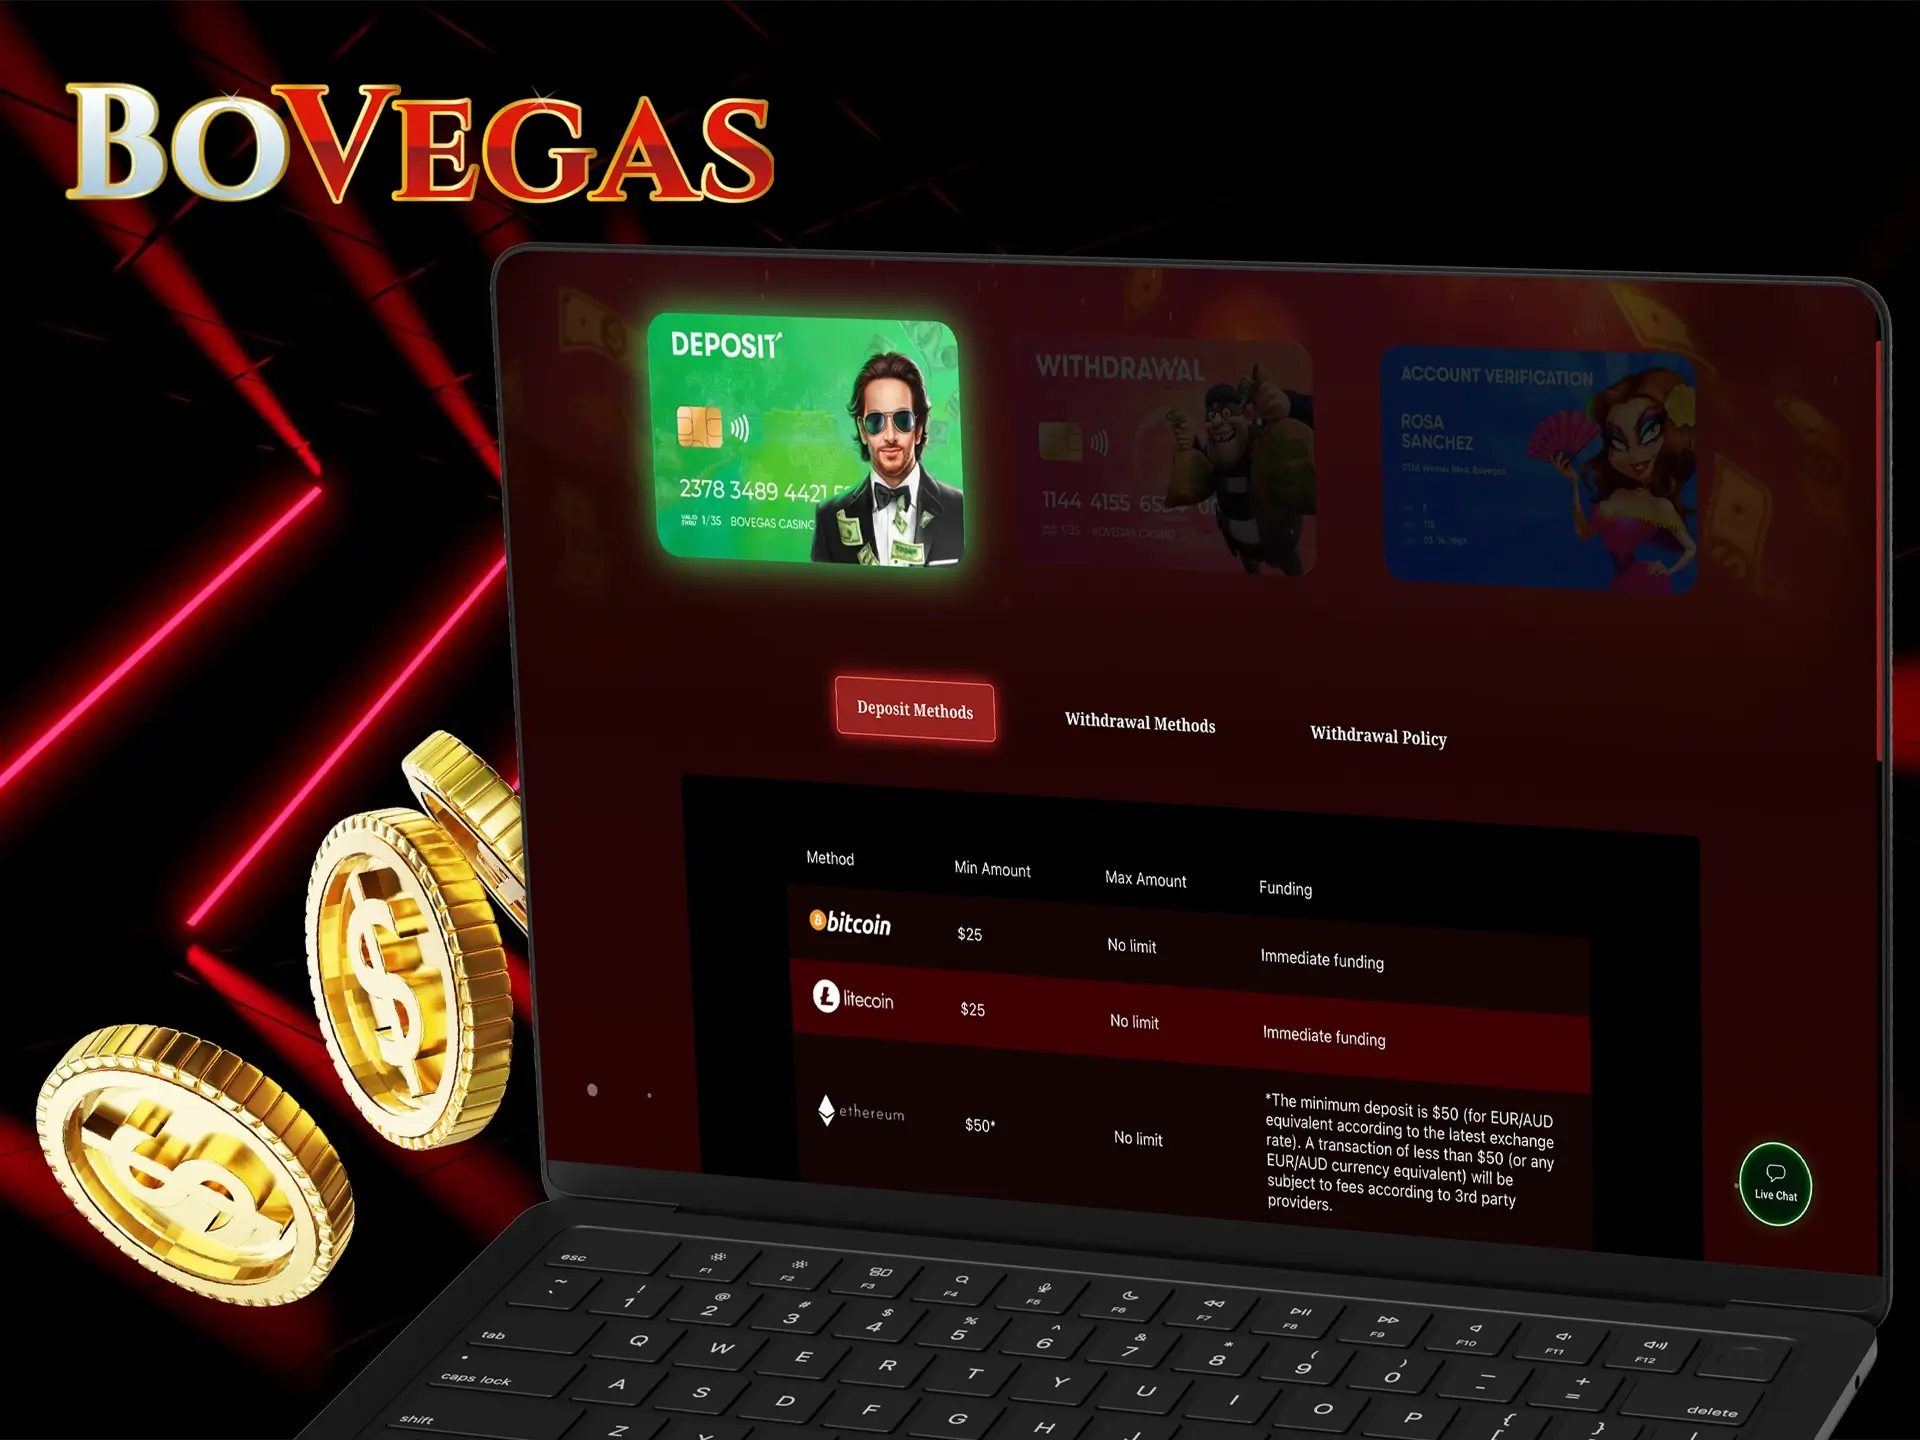 BoVegas Casino has a variety of methods available for you to deposit and withdraw your funds.